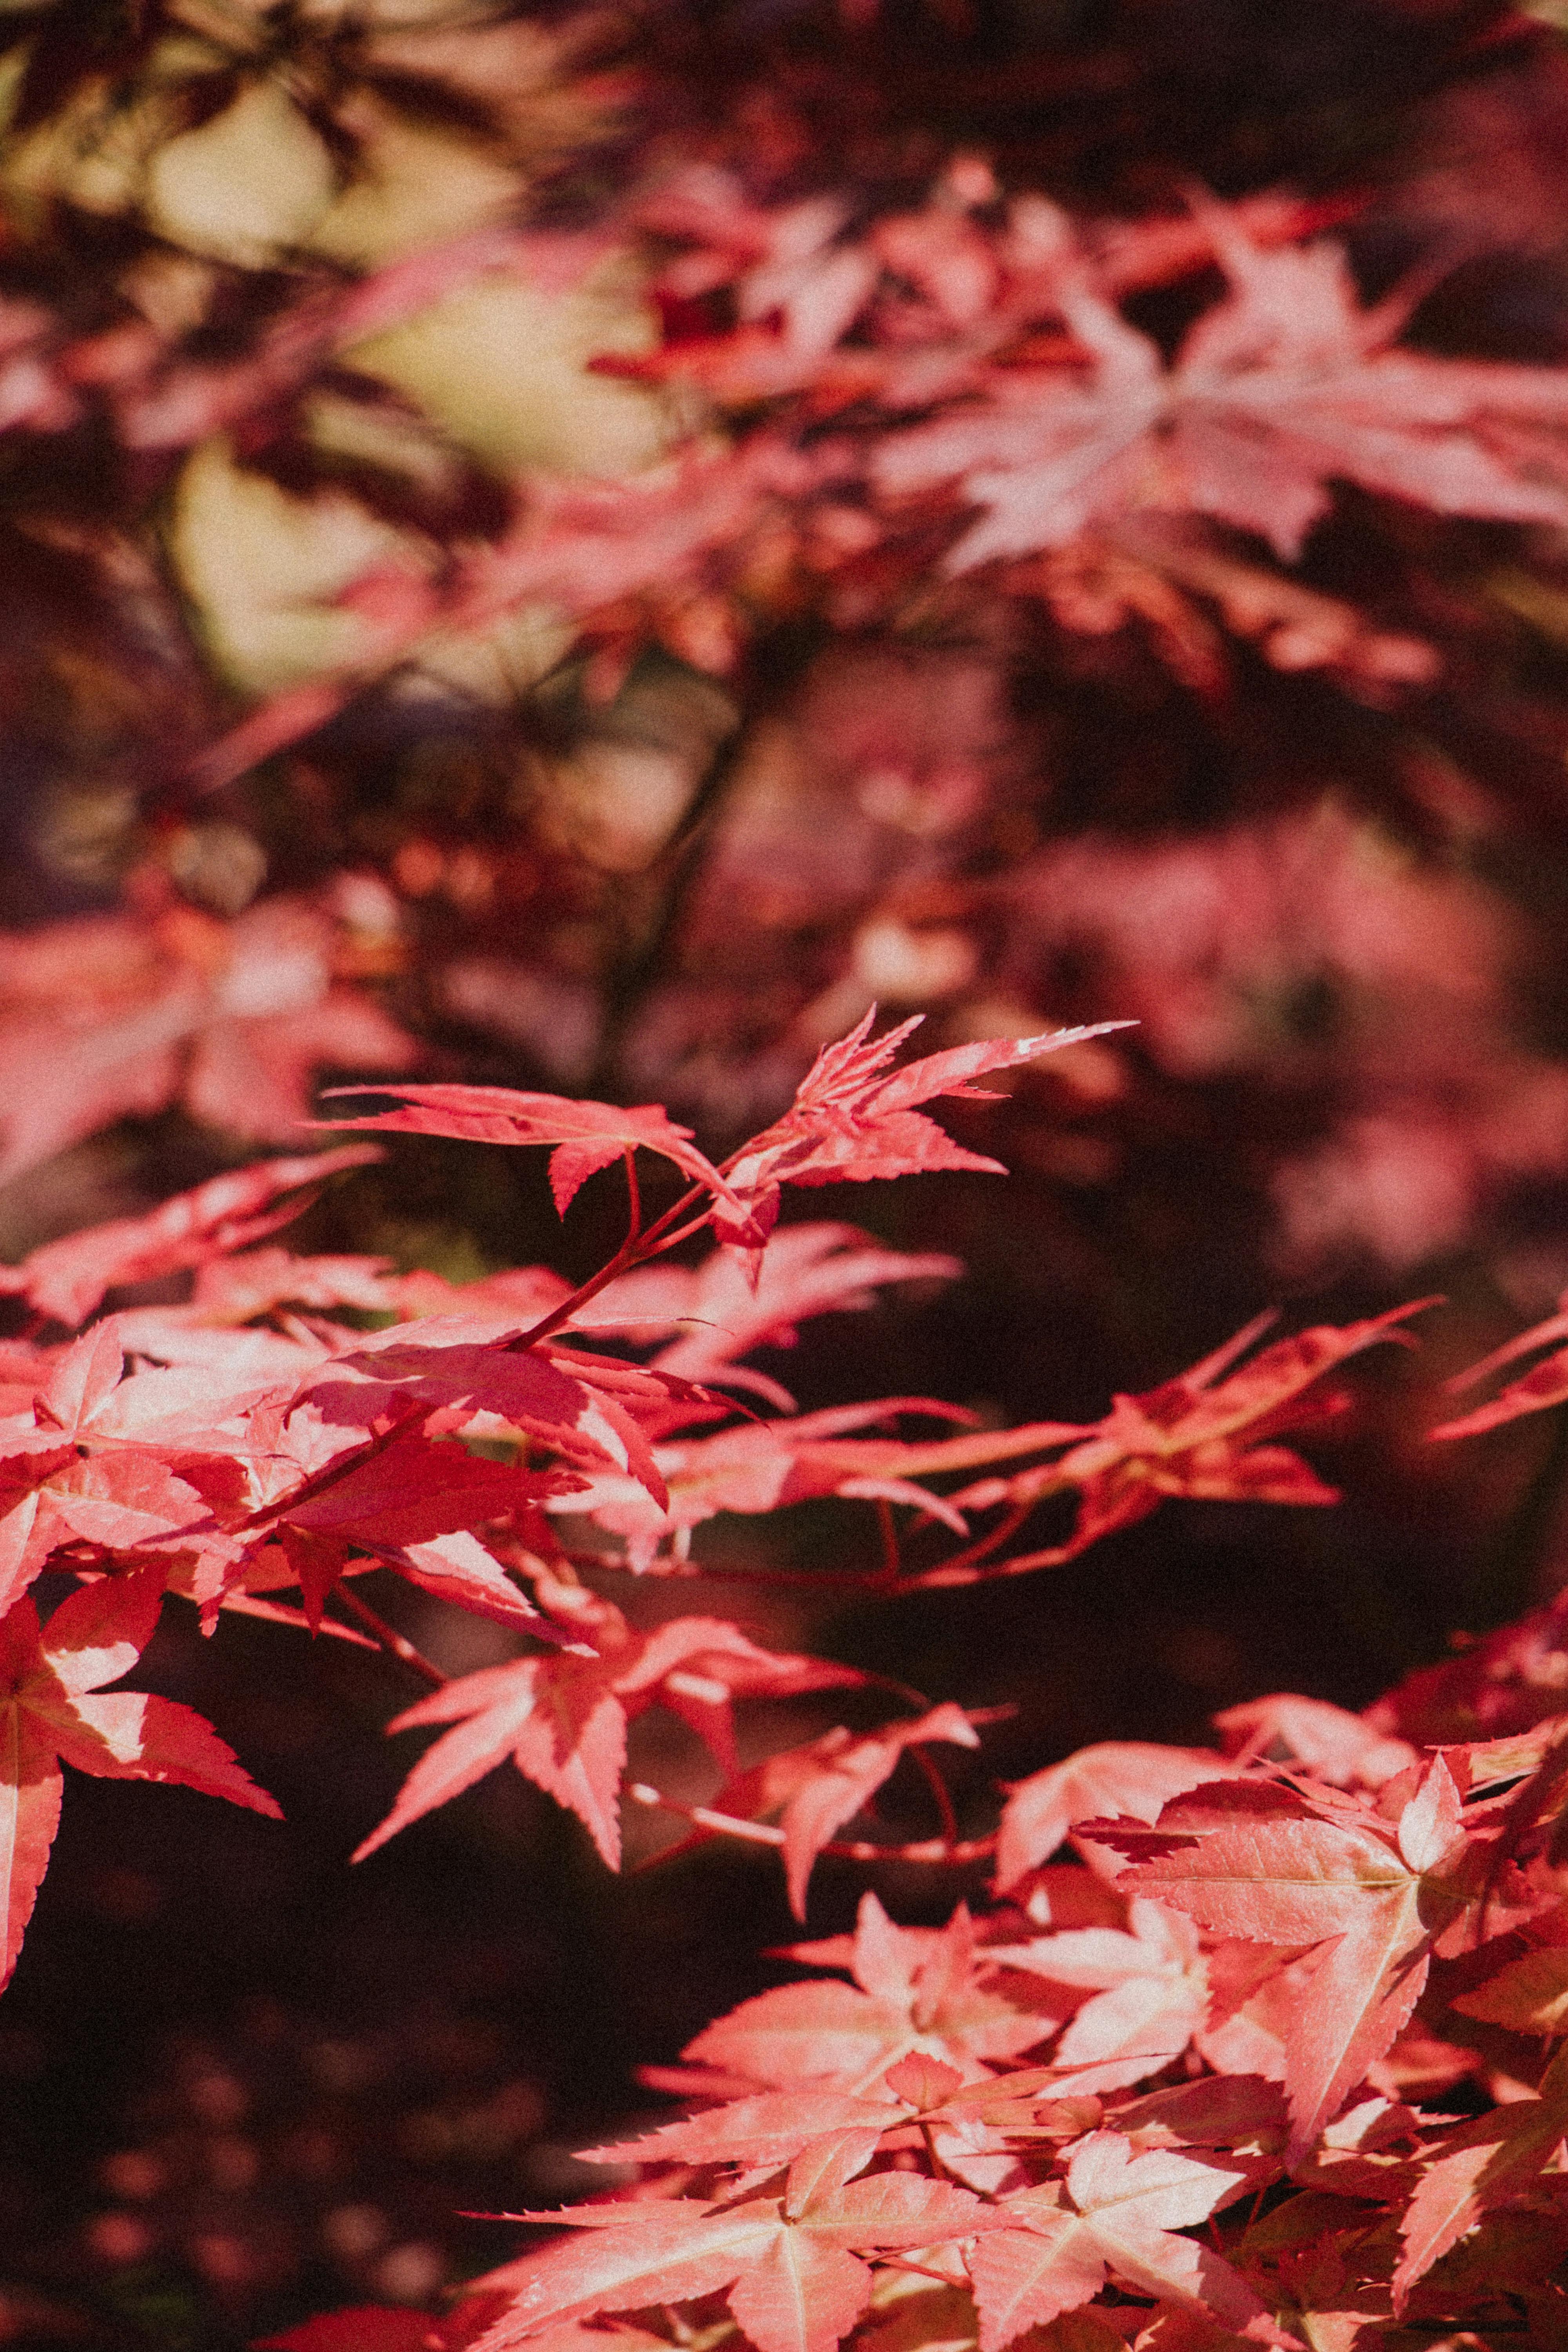 Red Maple Leaves Wallpaper - iPhone, Android & Desktop Backgrounds